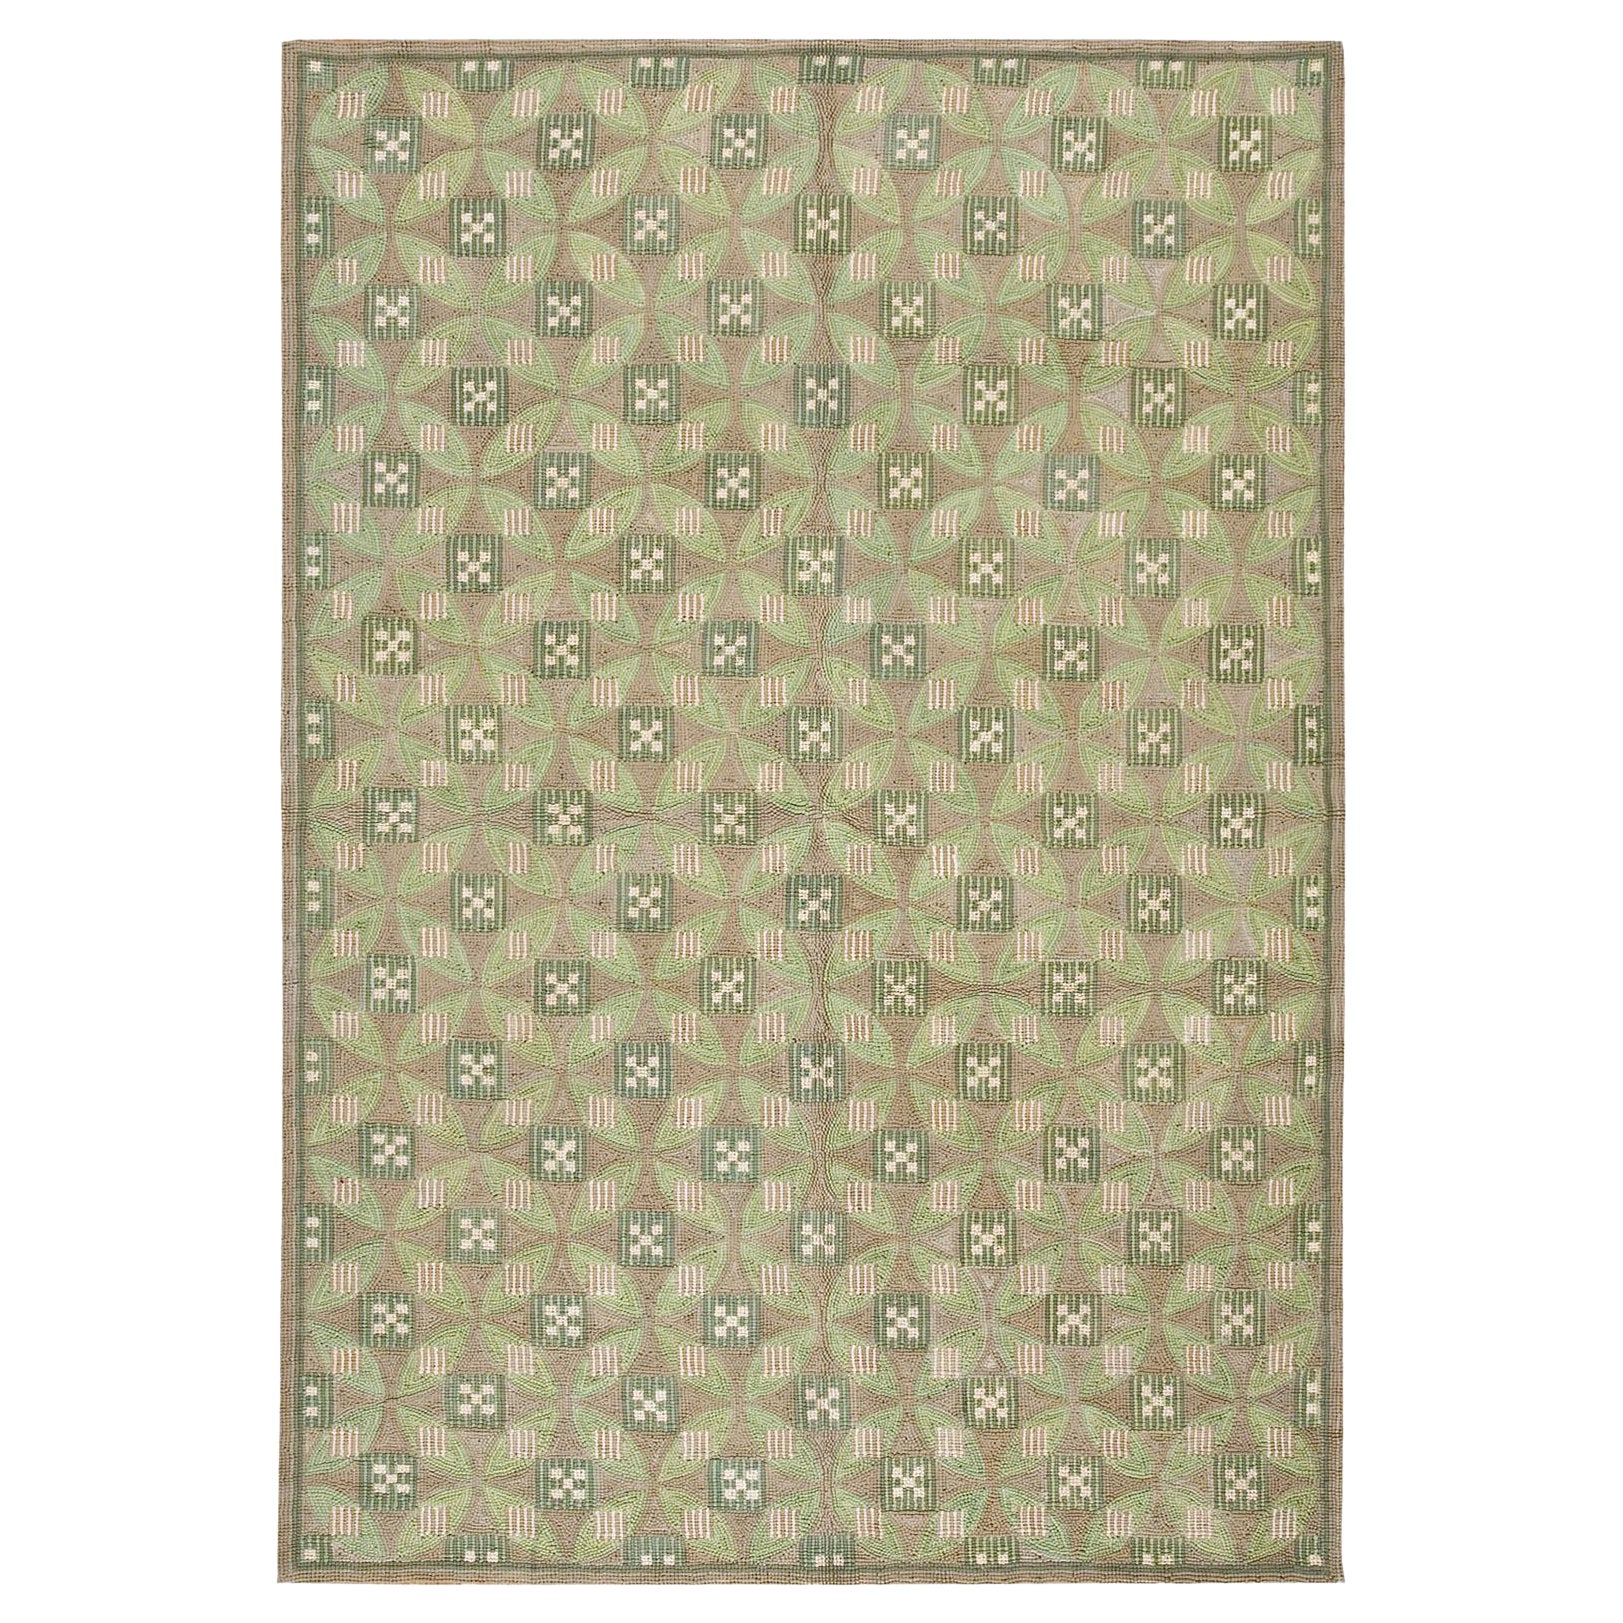 Contemporary Cotton Hooked Rug ( 6' x 9' - 183 x 274 ) For Sale